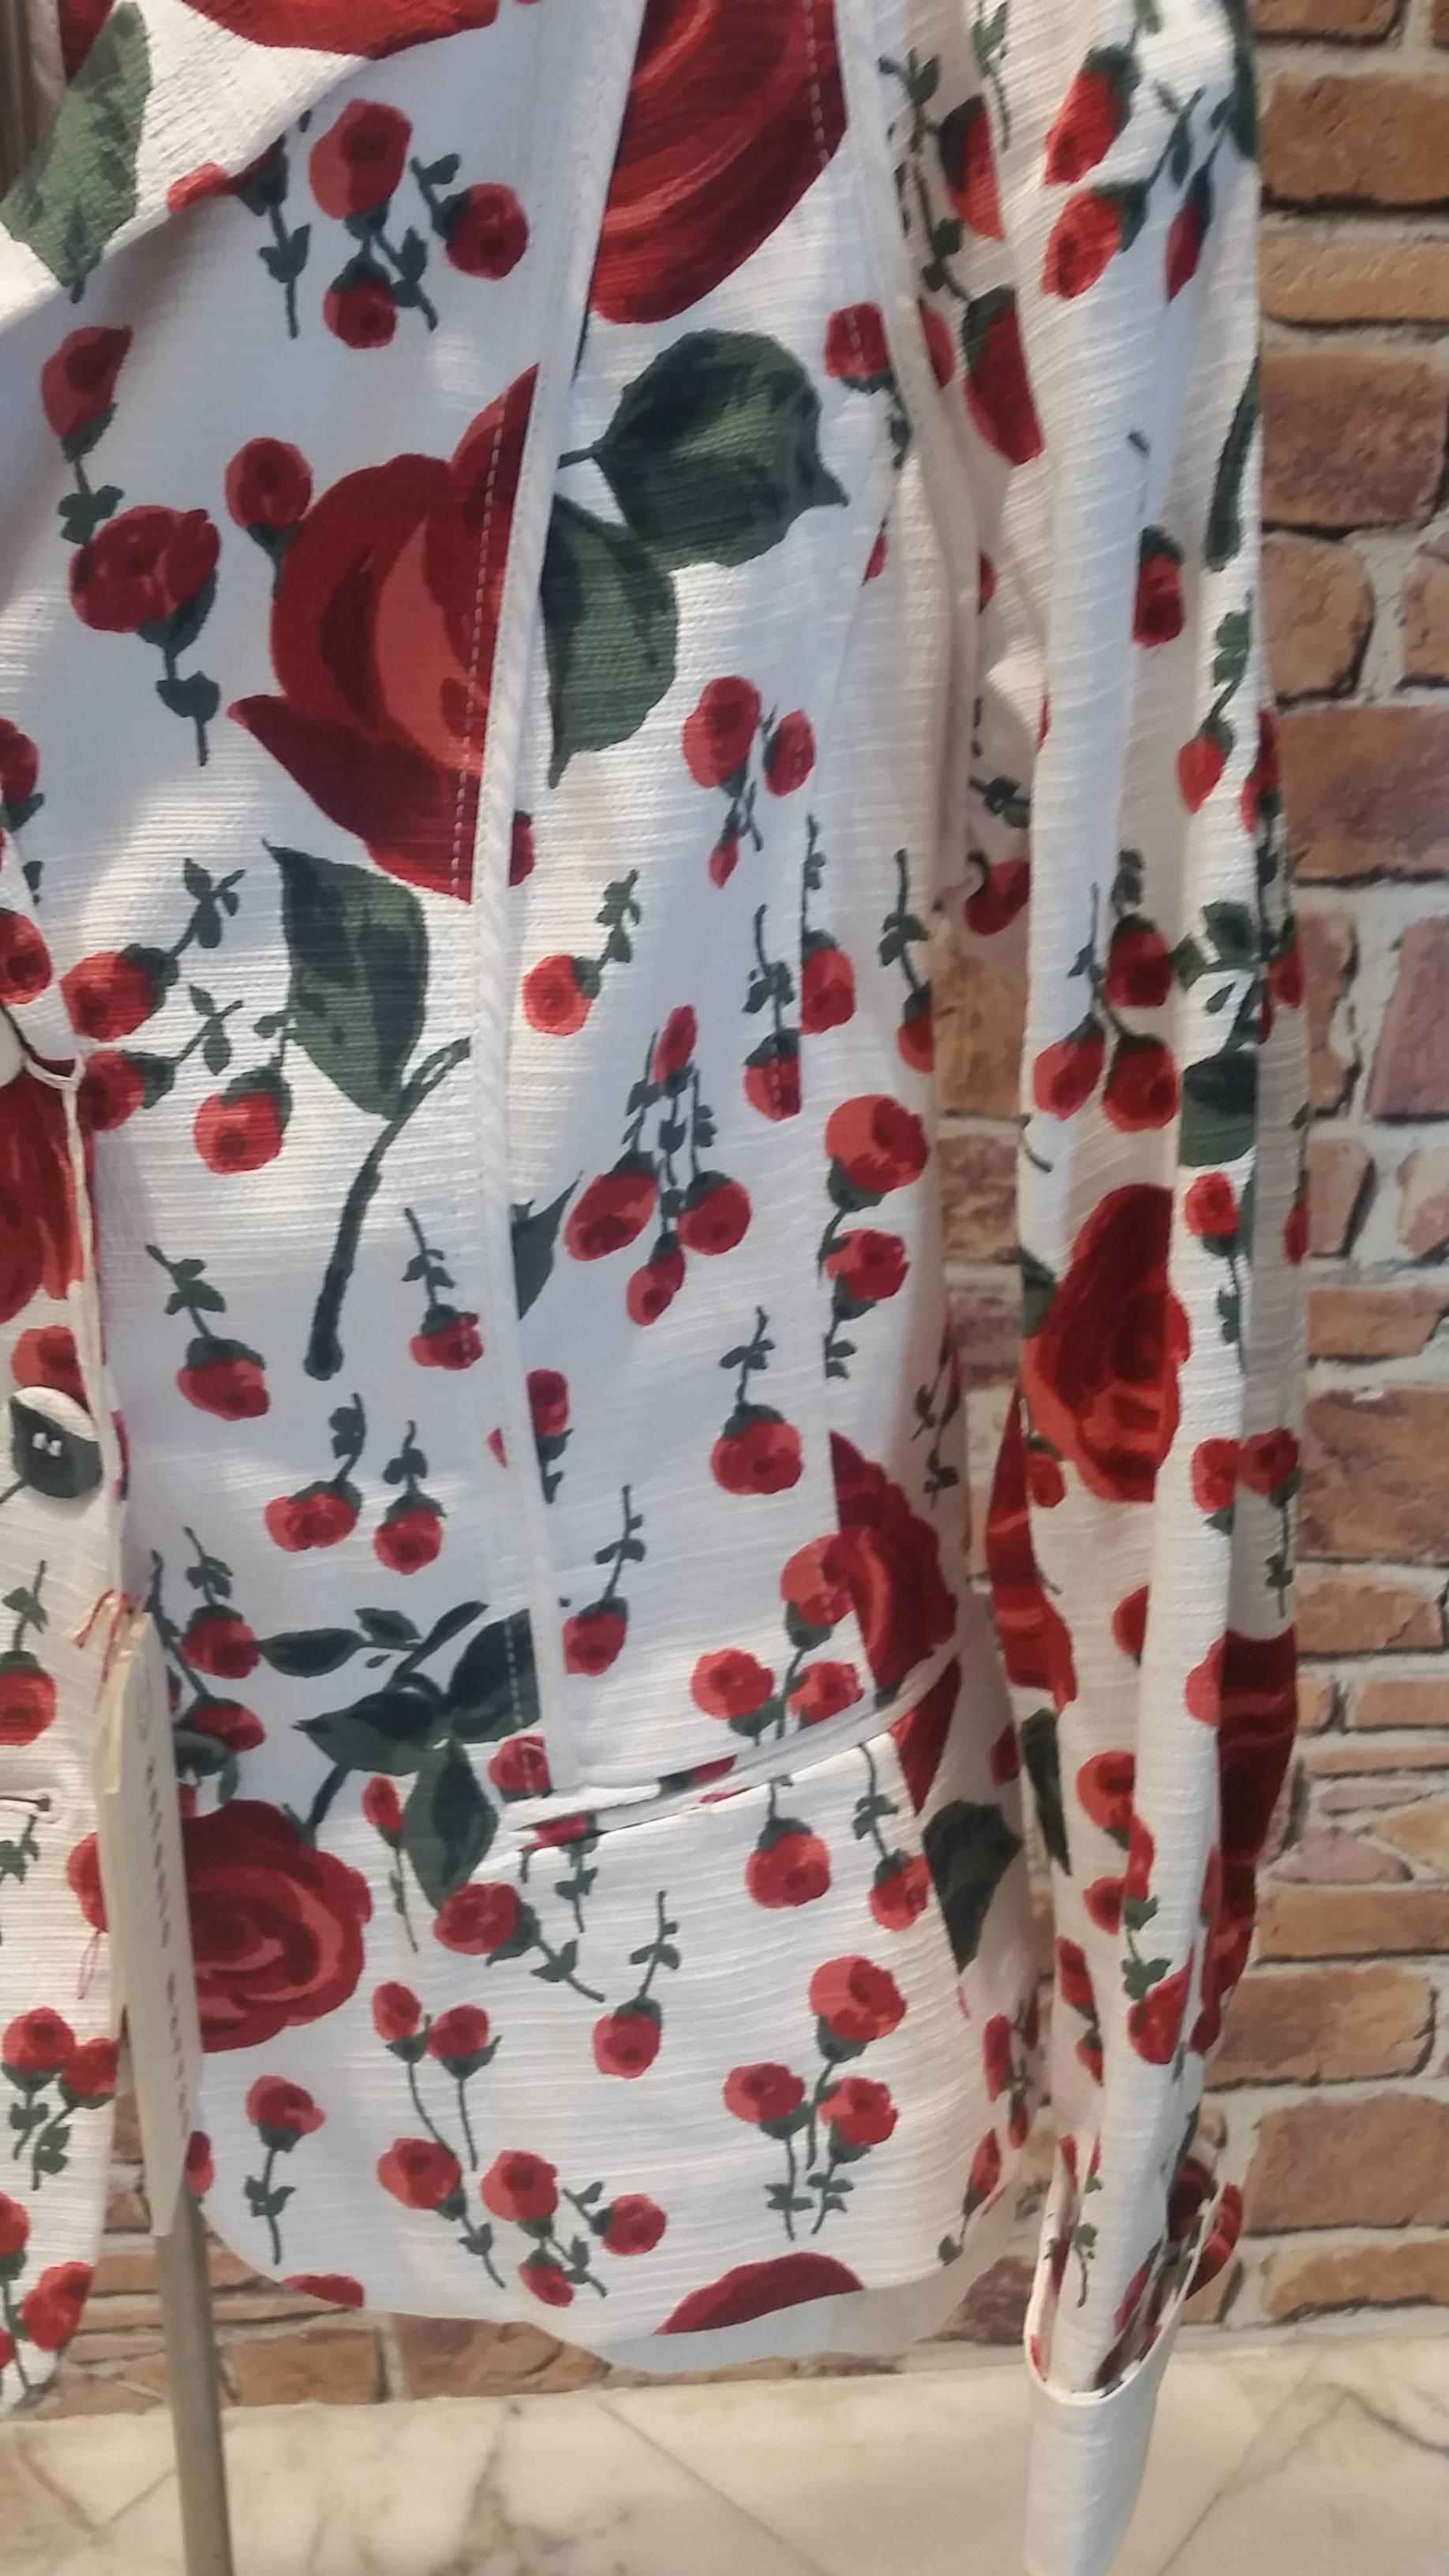 1990s Antonio Marras white with red roses jacket 
Still with tags 
Italian size range is 46 but it fits small
Composition:
98% cotton
2% elastane